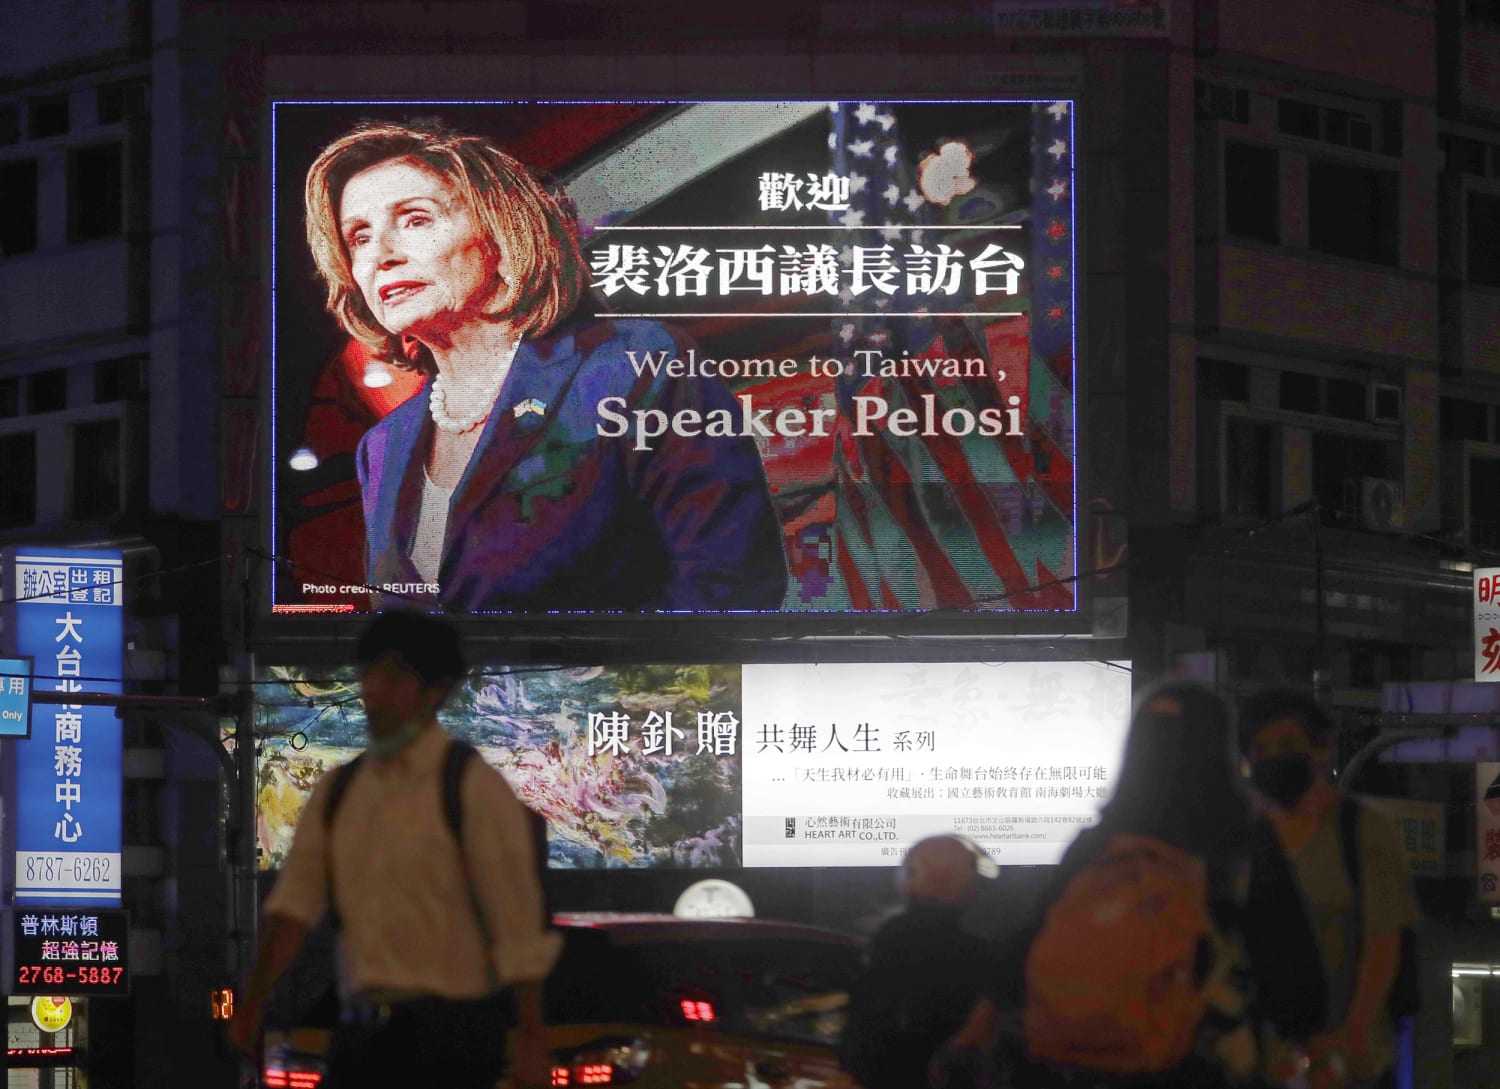 I’m a Taiwanese citizen, and I’m wary of Nancy Pelosi’s visit